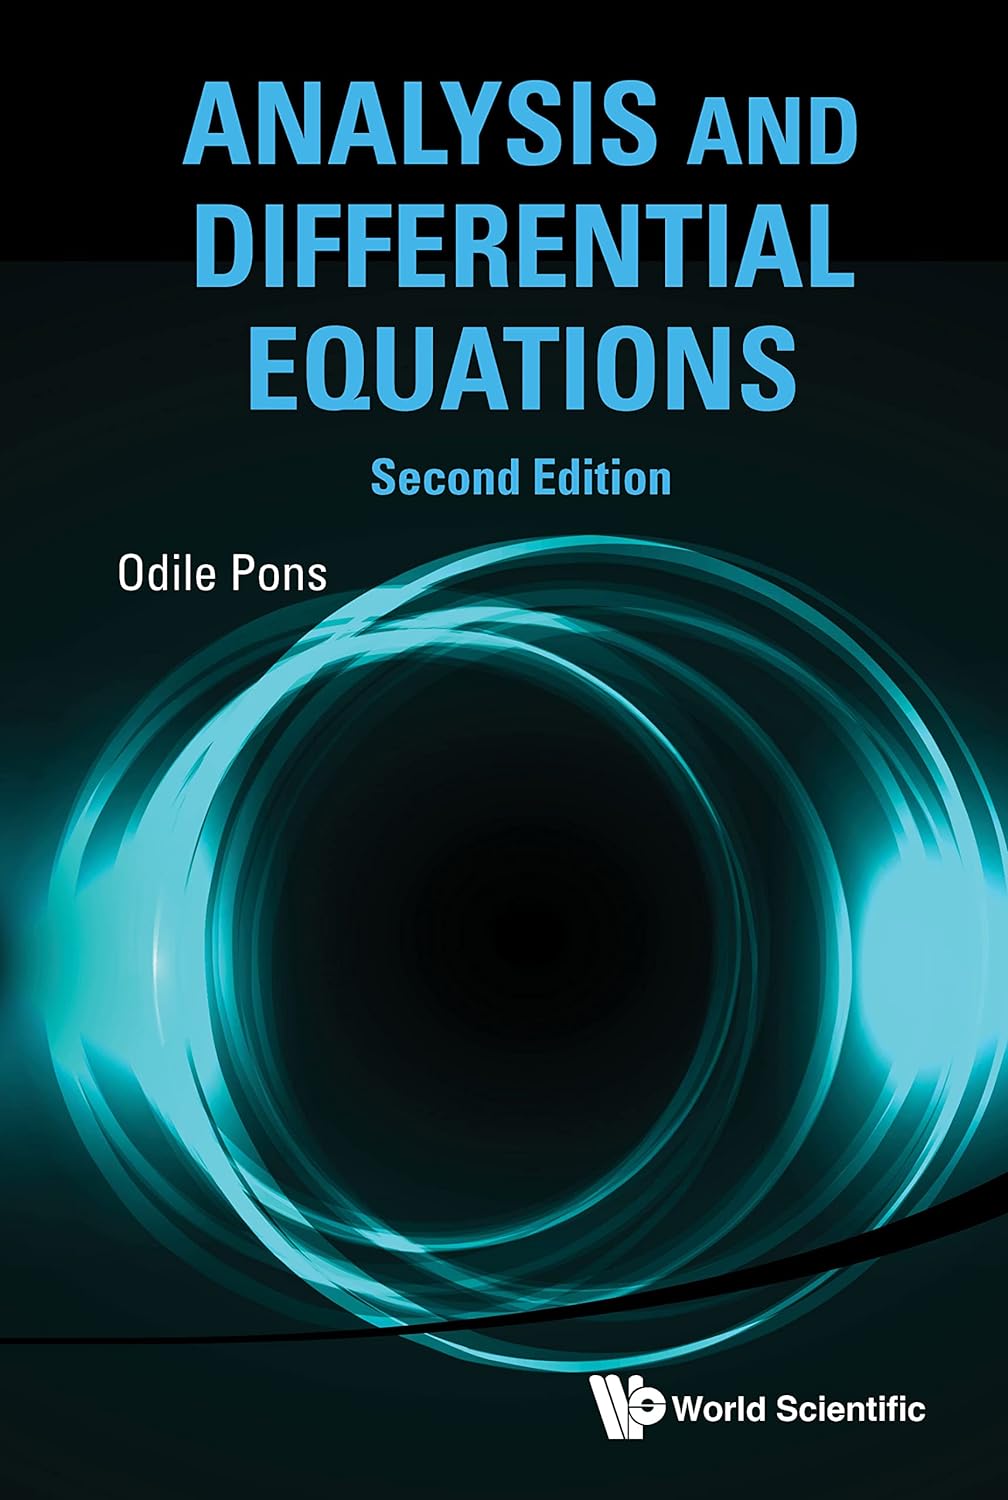 Analysis And Differential Equations 2nd Edition Softarchive 0751